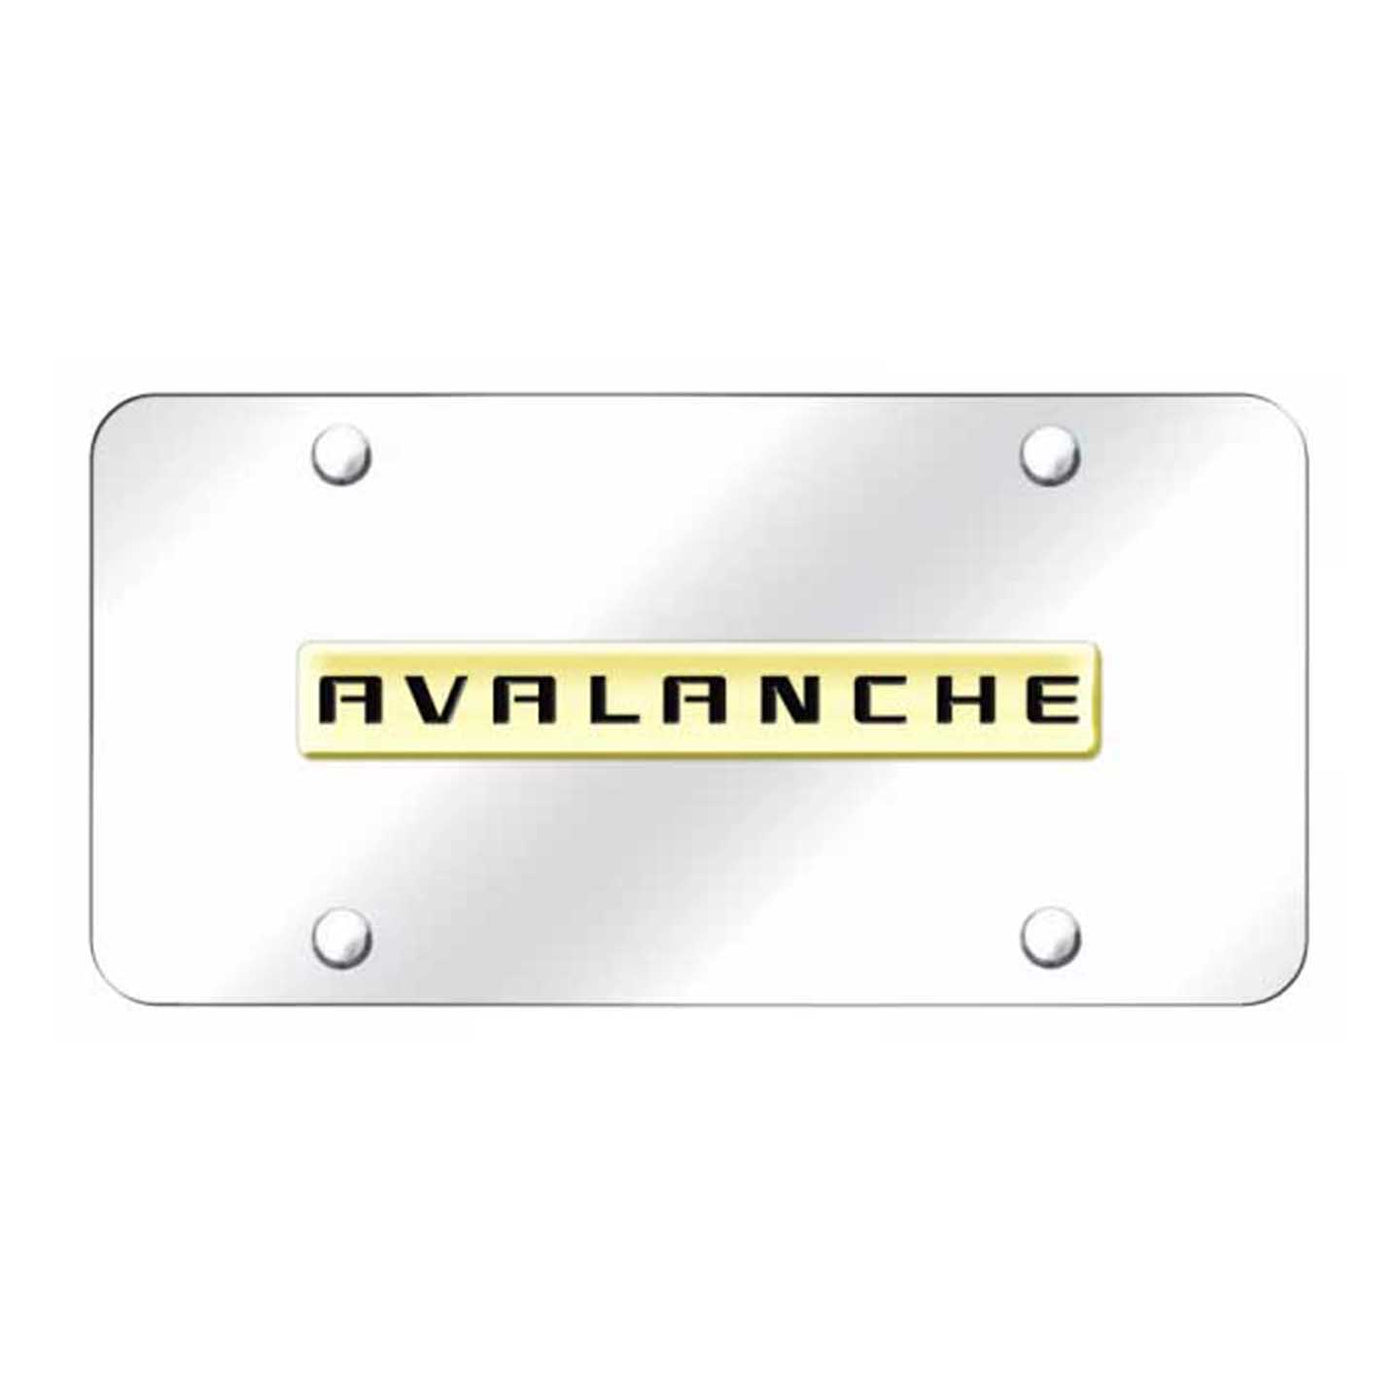 Avalanche Name License Plate - Gold on Mirrored